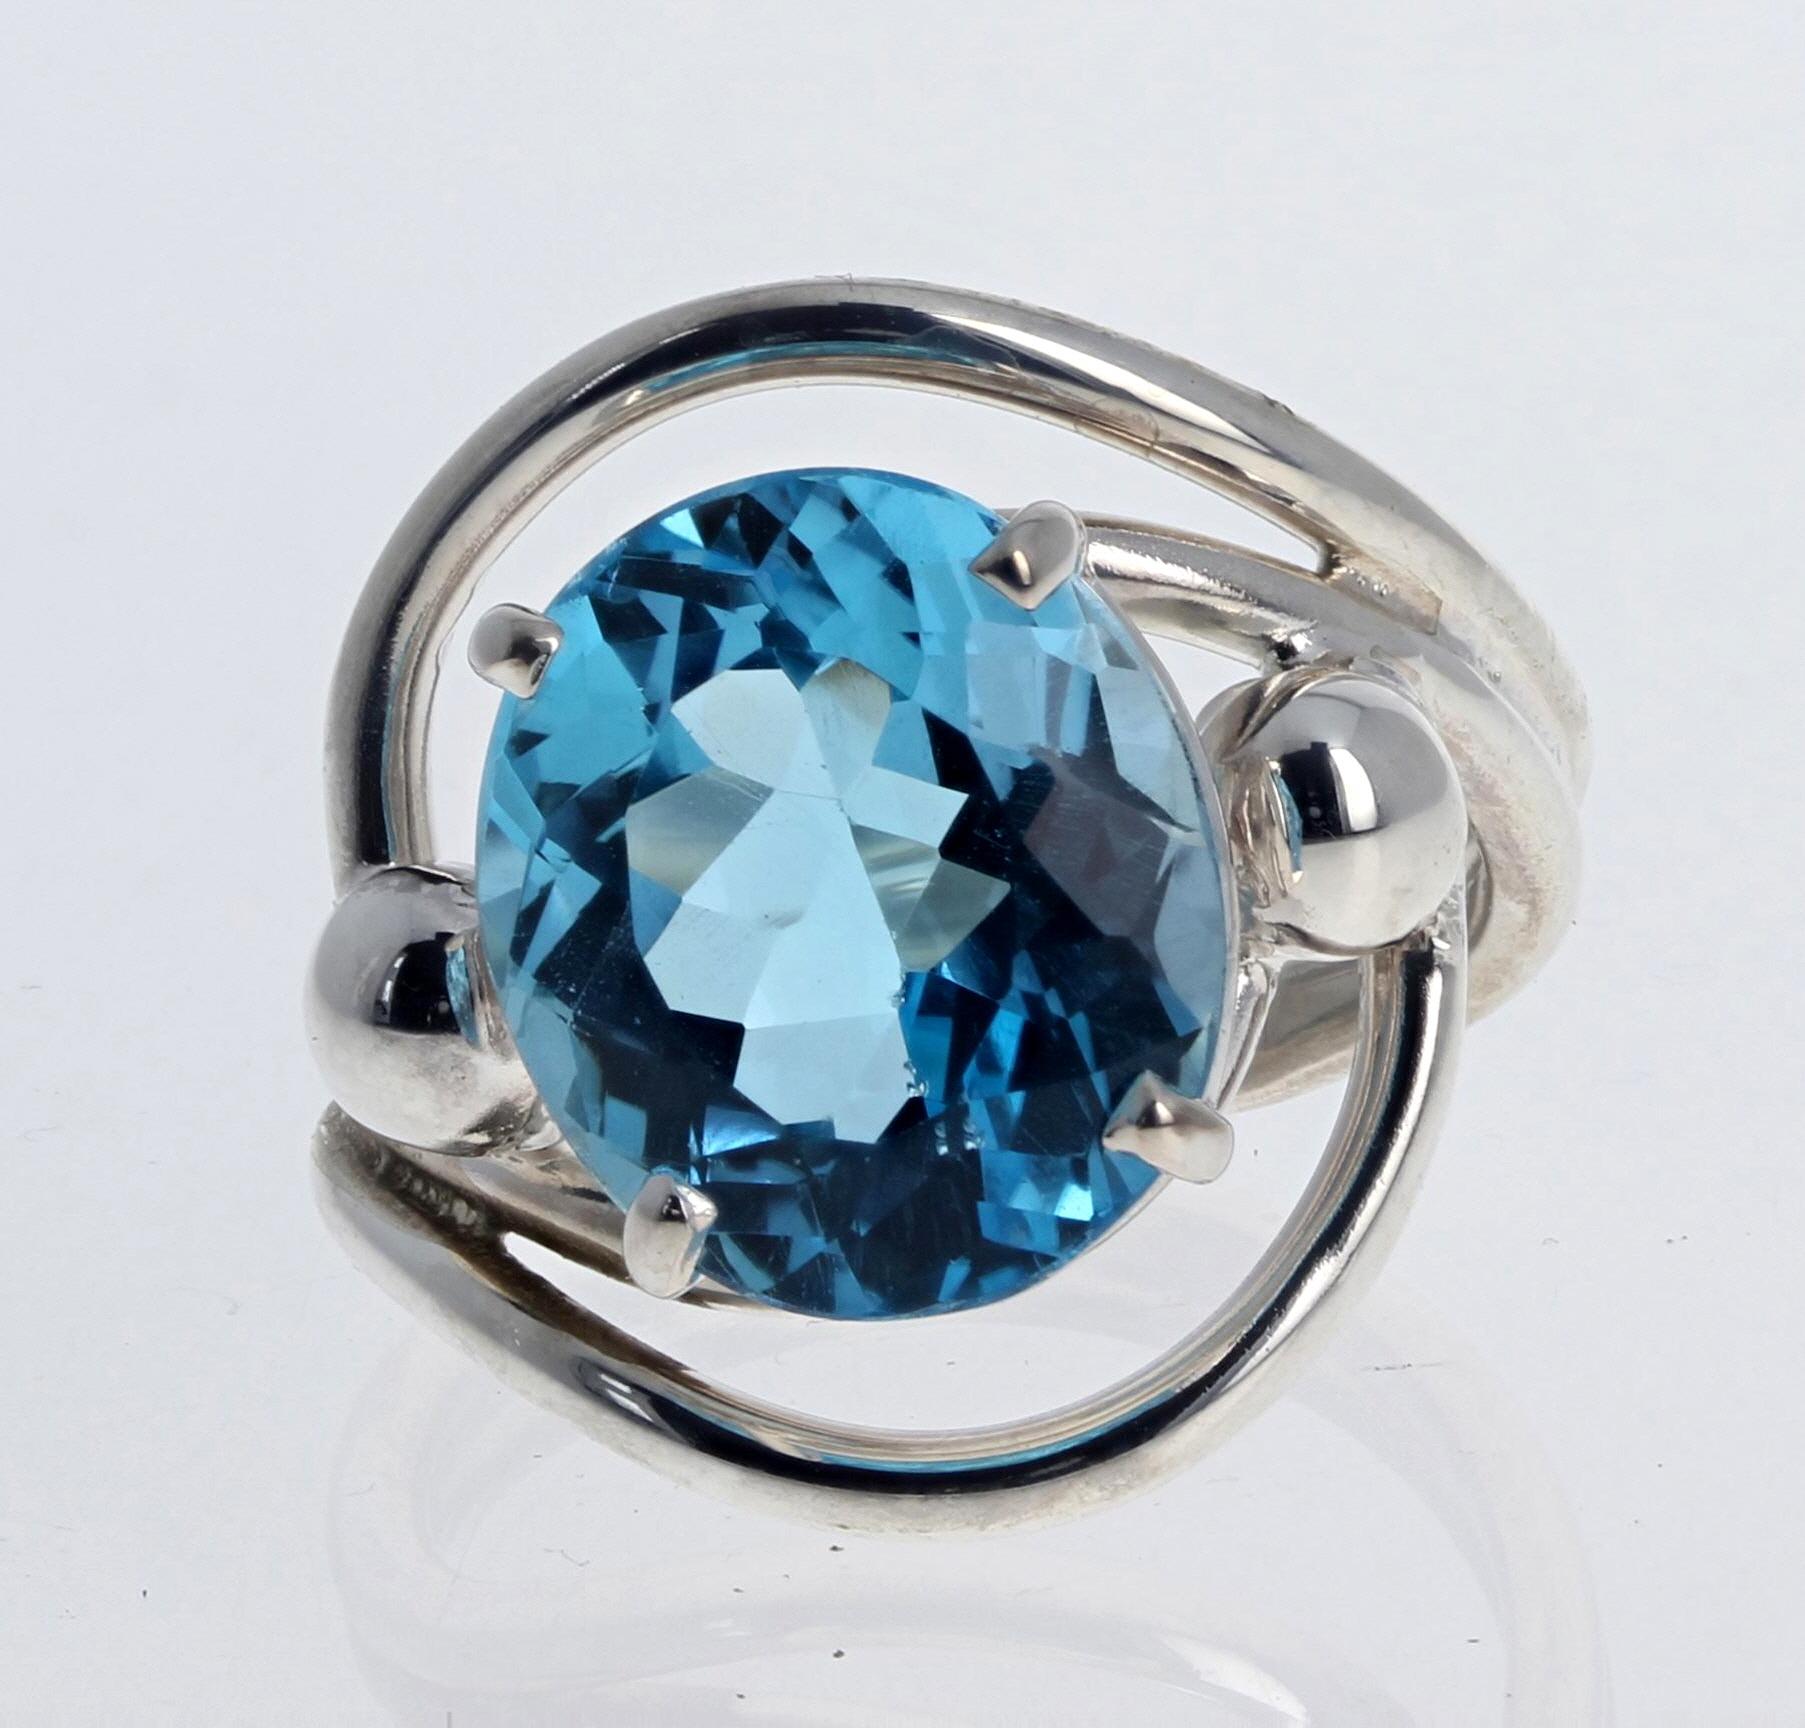 Glittering beautiful blue Topaz ring.  This measures 14.2mm x 12mm and is 10.26 Carats.  It is intensely blue with no eye visible inclusions. and is set dramatically up on a sterling silver designer ring size 9 (sizable).  